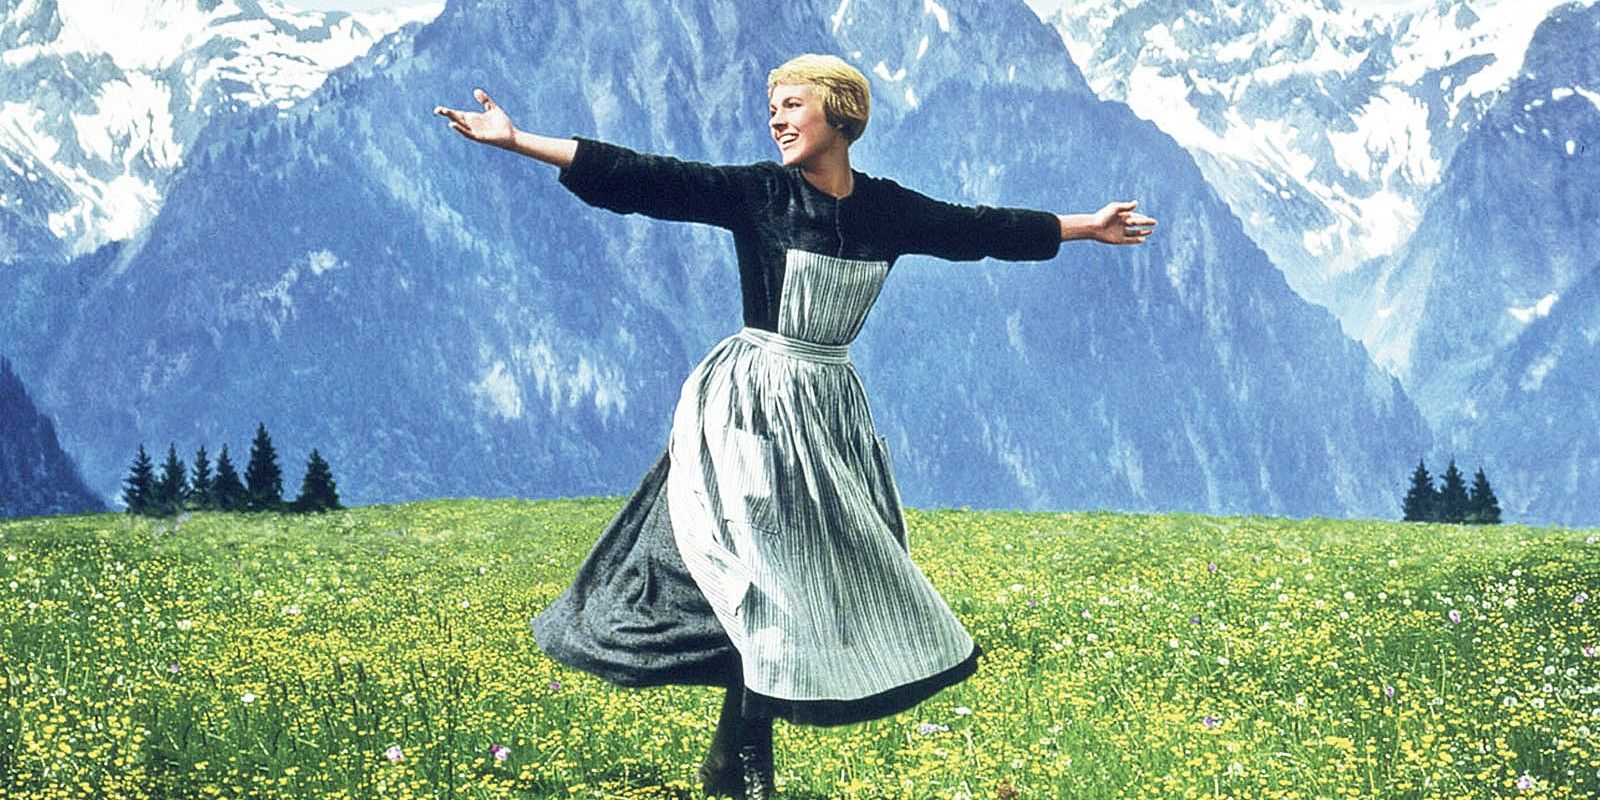 10 Best Movie Musicals Of All Time According To The American Film Institute